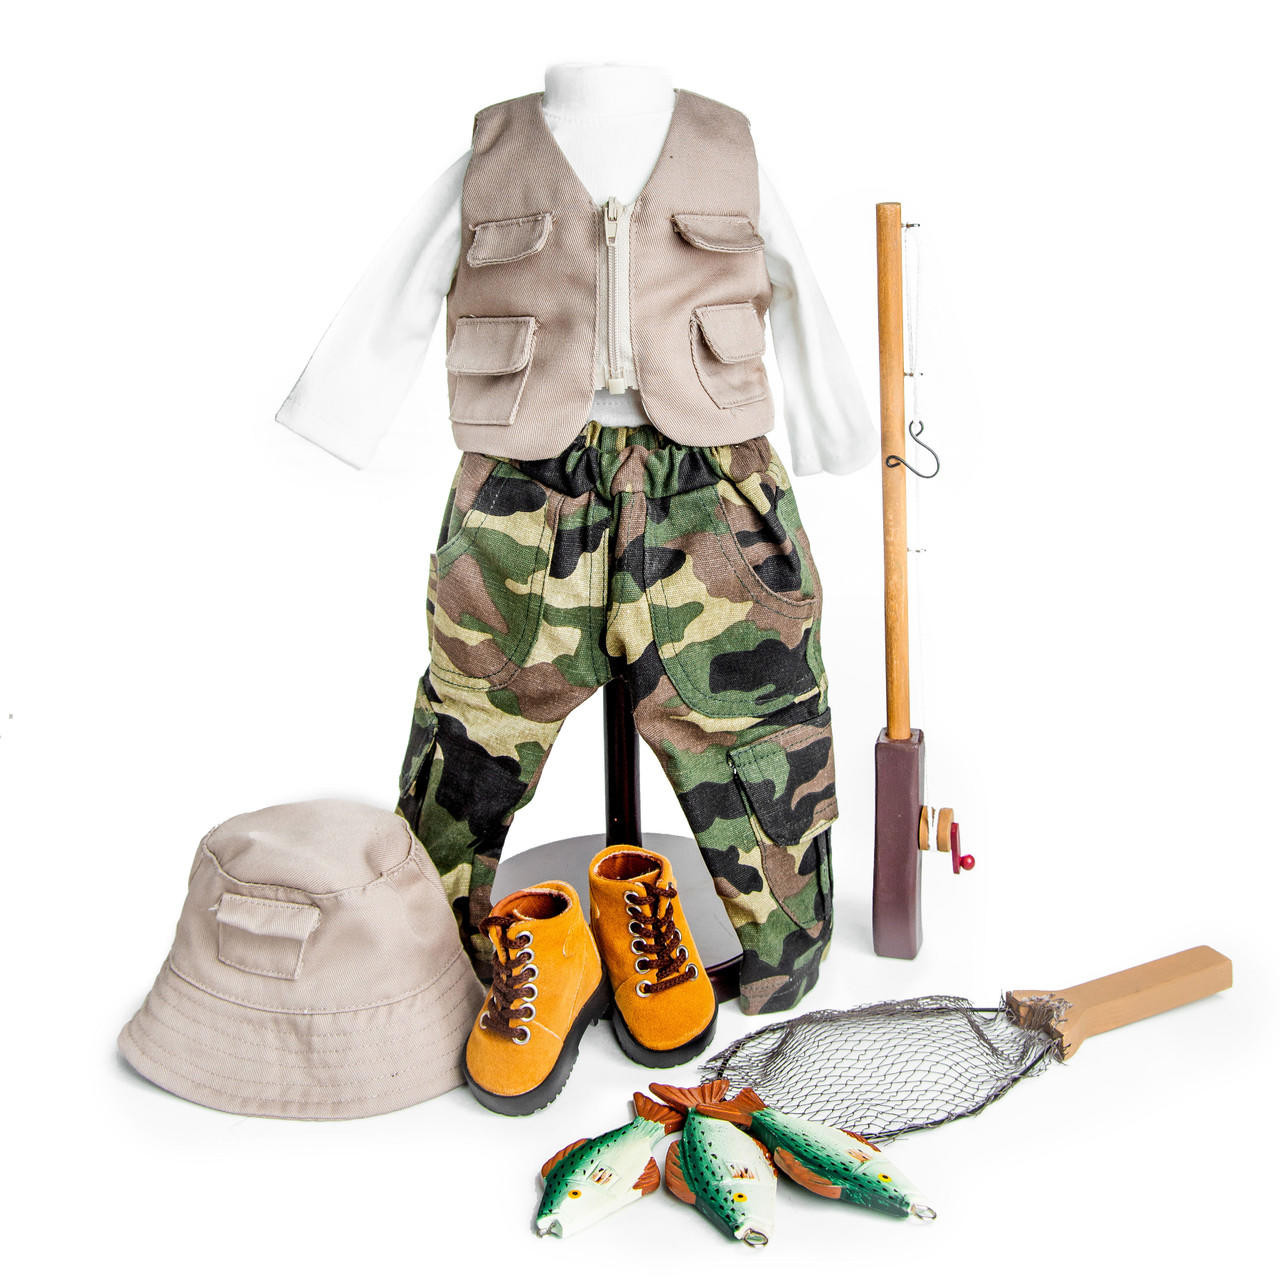 Kids Fishing Outfit 